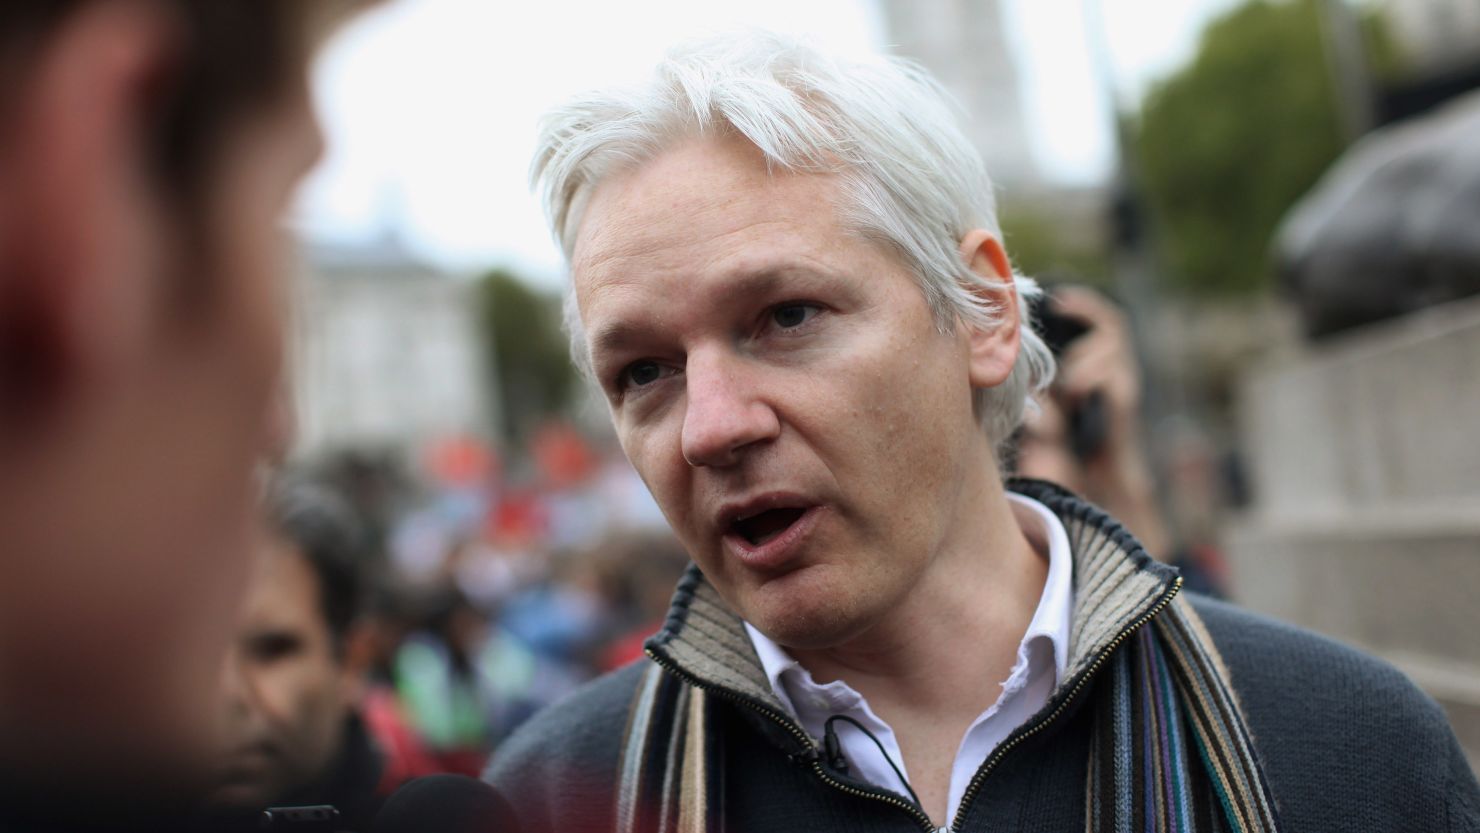 Julian Assange, founder of the WikiLeaks website, says his first guest on his new talk show will be controversial.